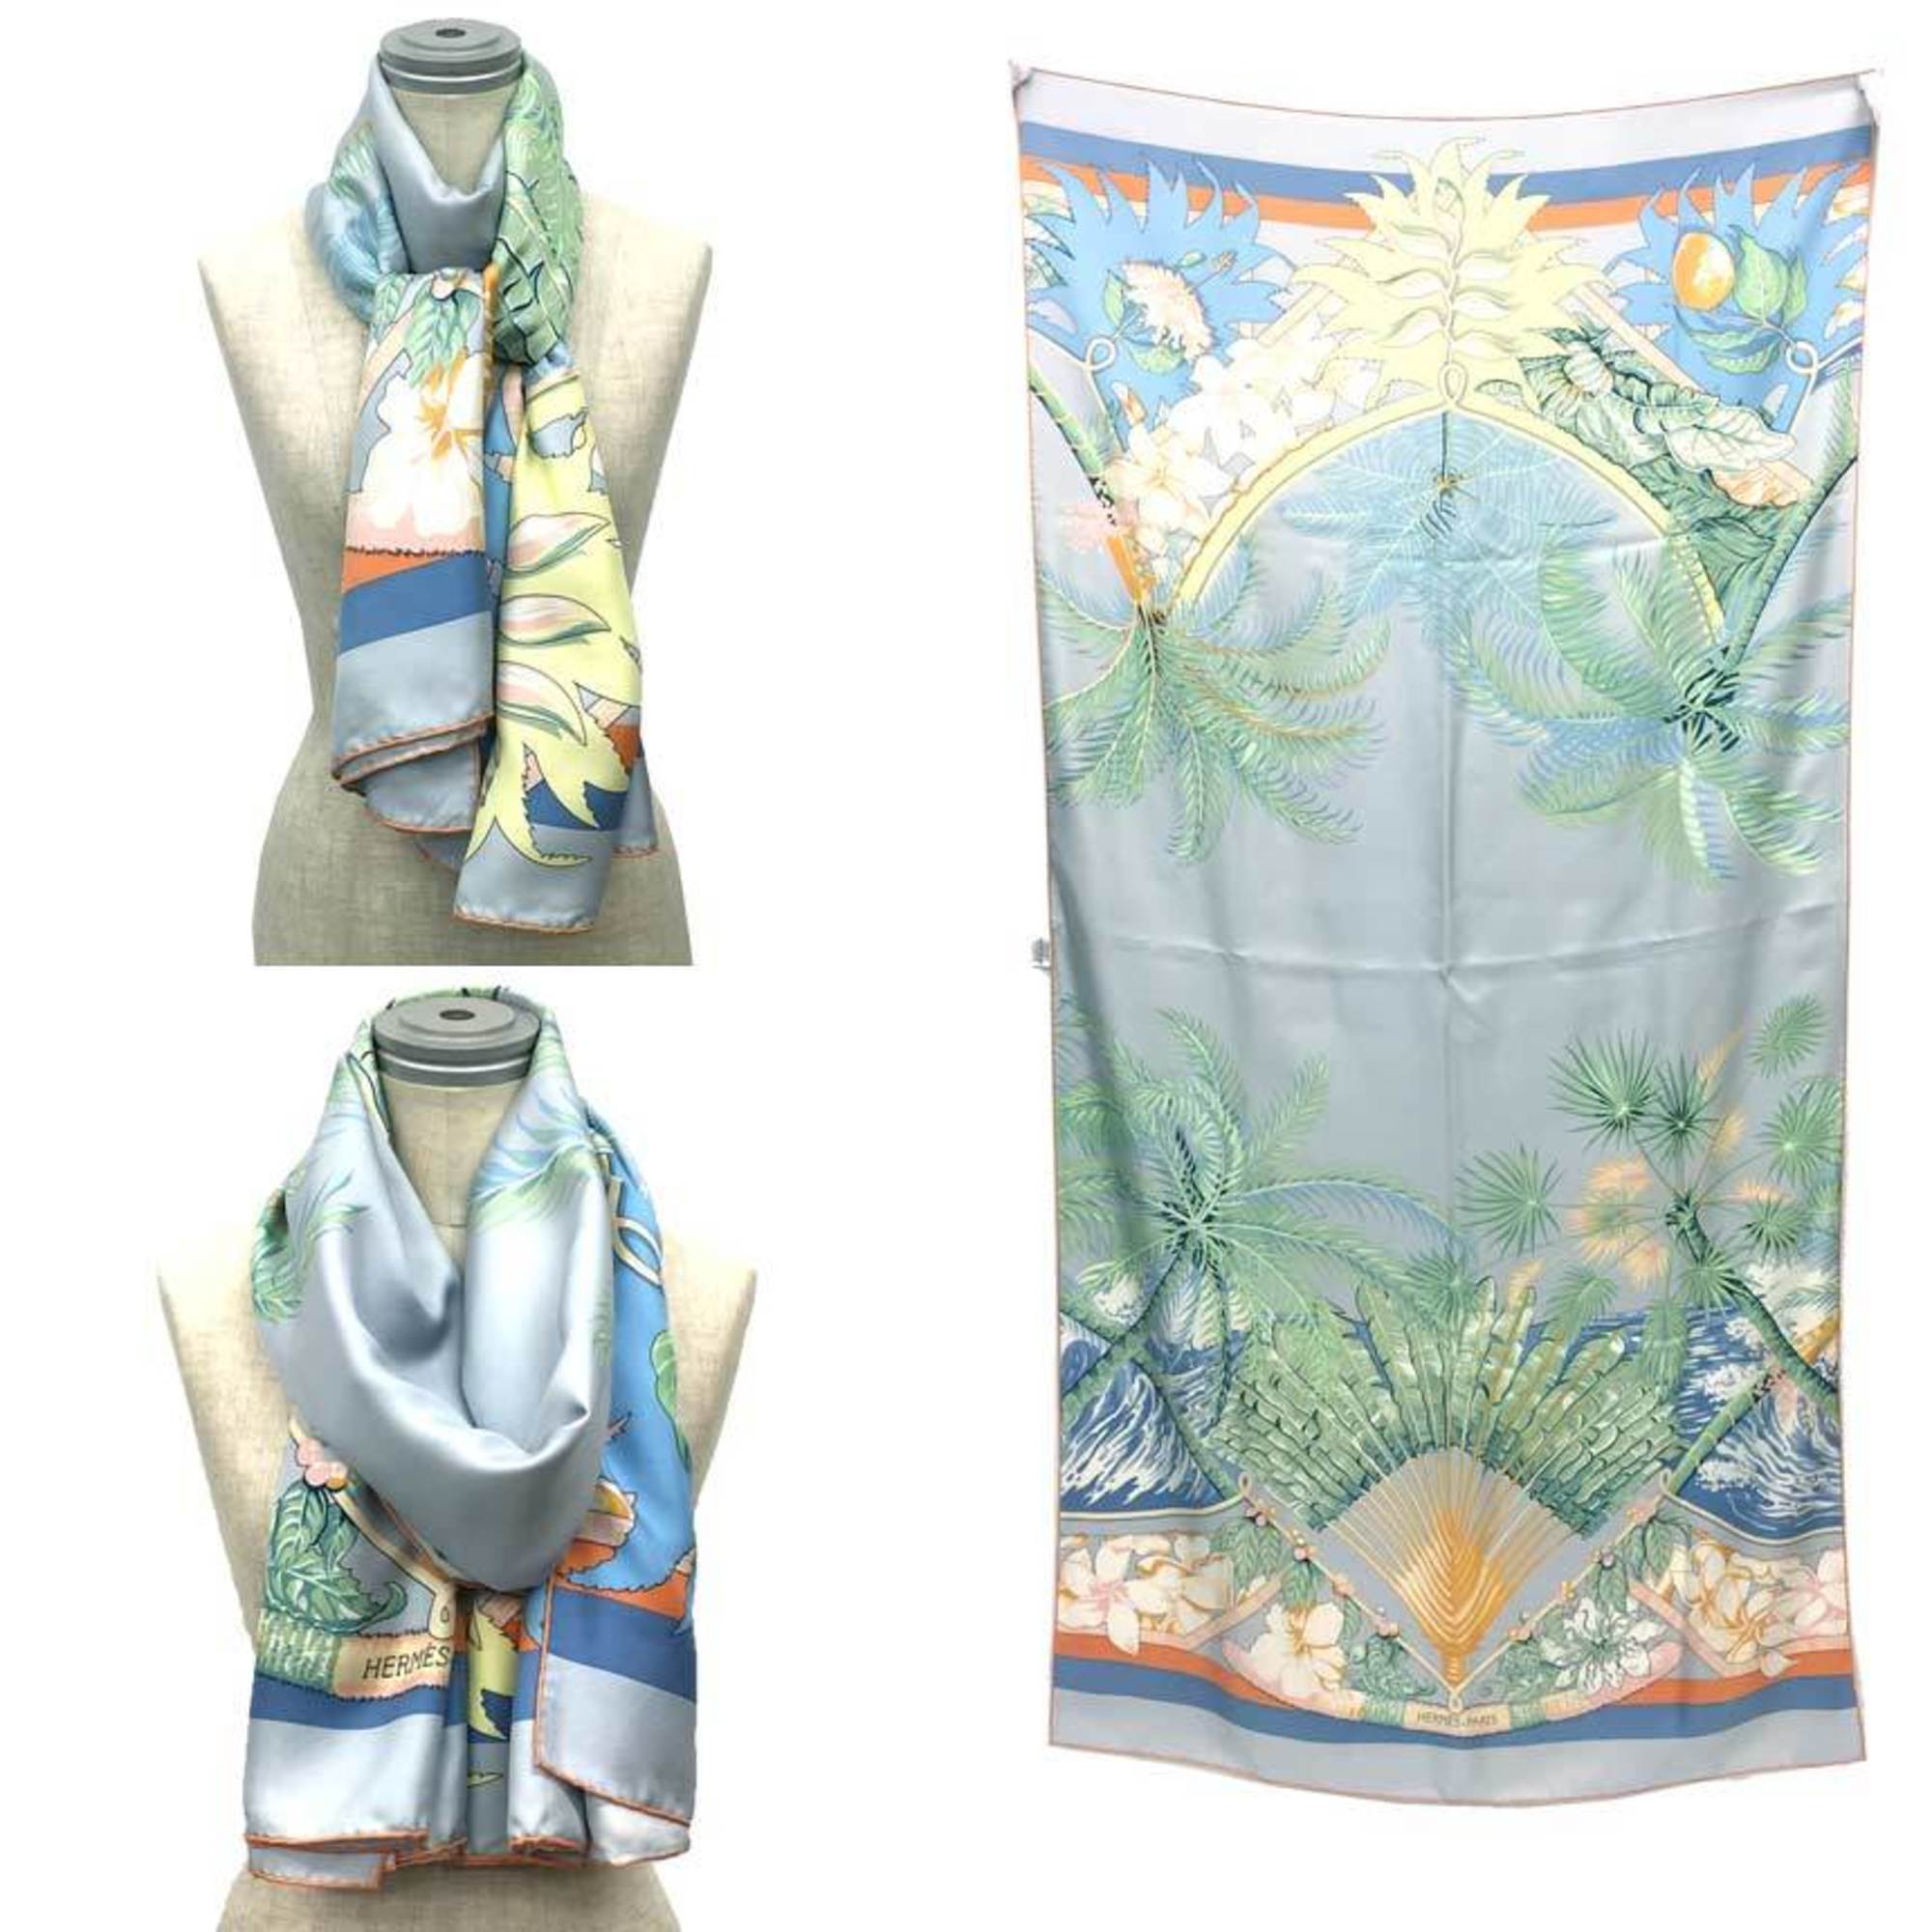 HERMES Hermes scarf muffler stole shawl palm tree large size 100% silk multi-cover aq9859